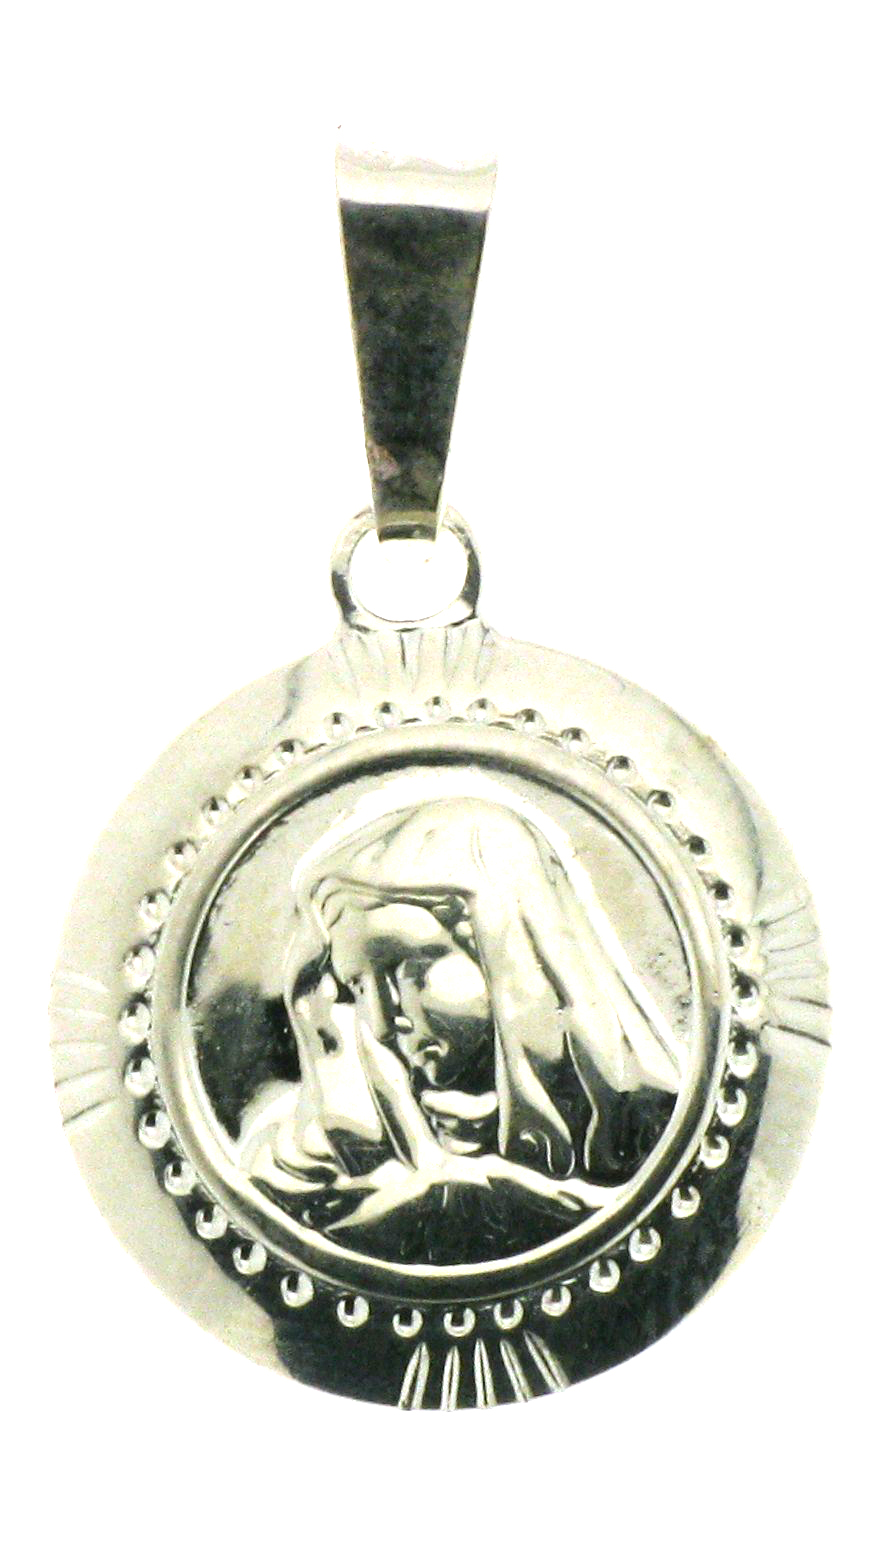 ROUND SILVER MEDAL